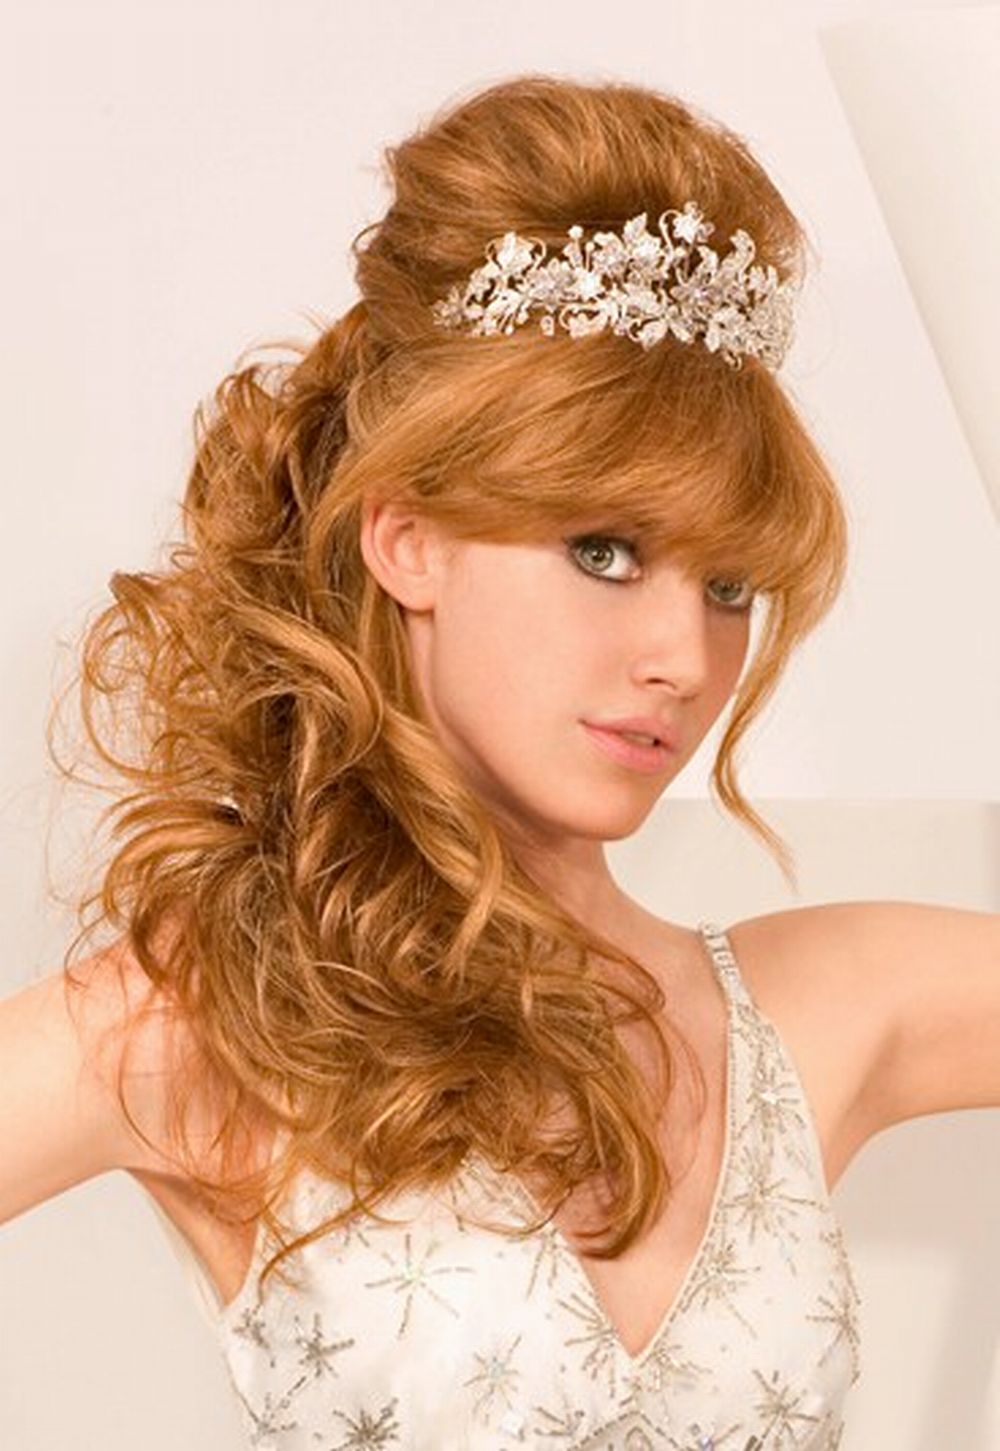 Princess hairstyle image collection